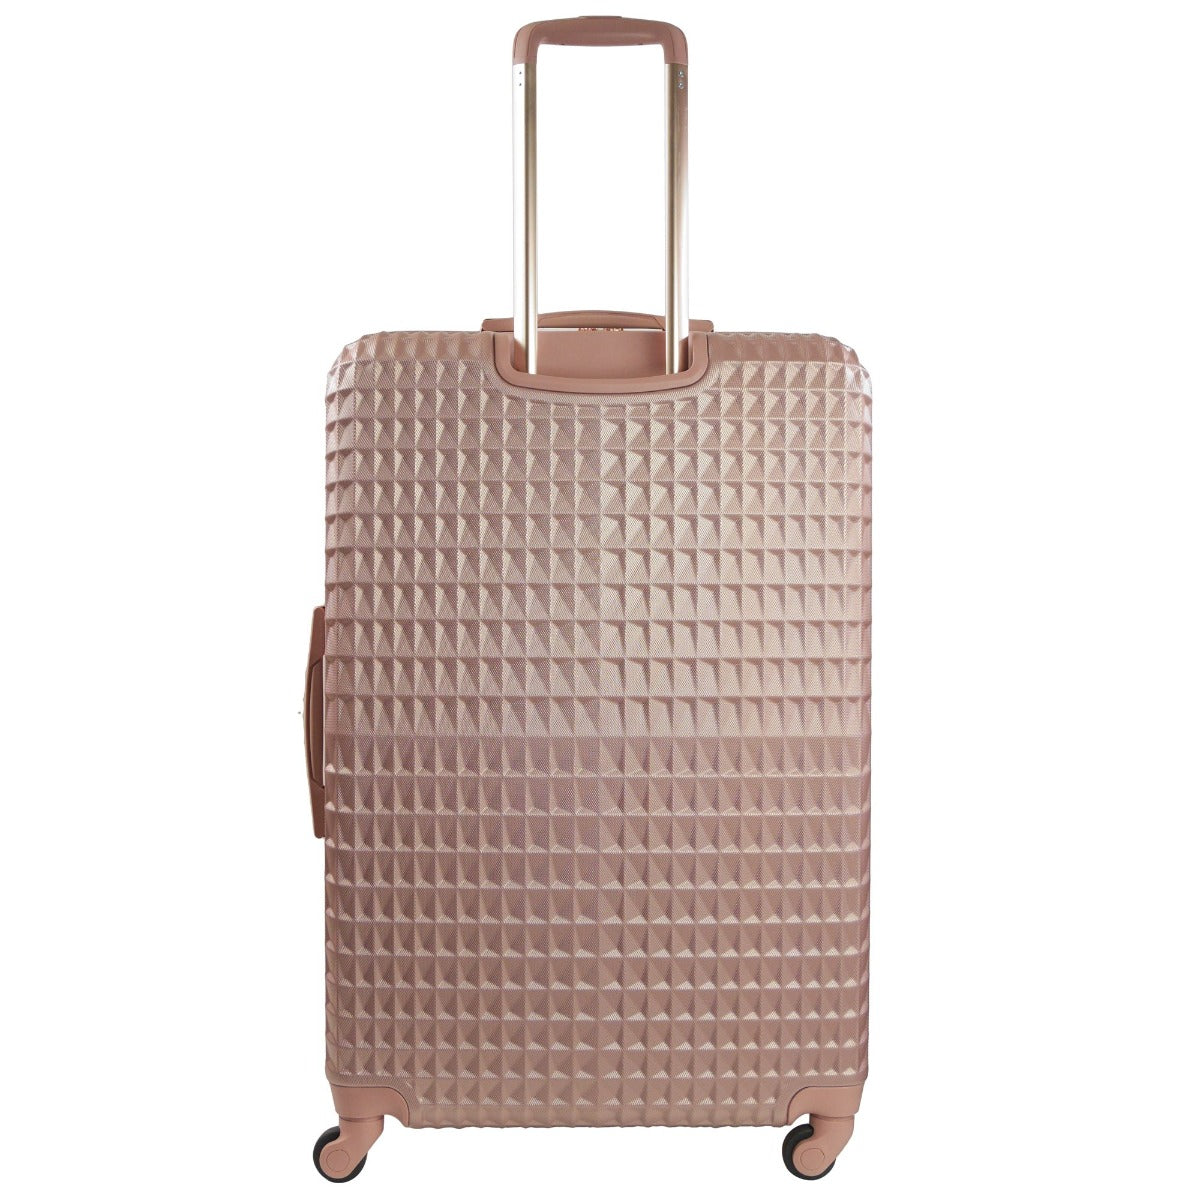 Ful Geo 31" check-in hard-side spinner suitcase